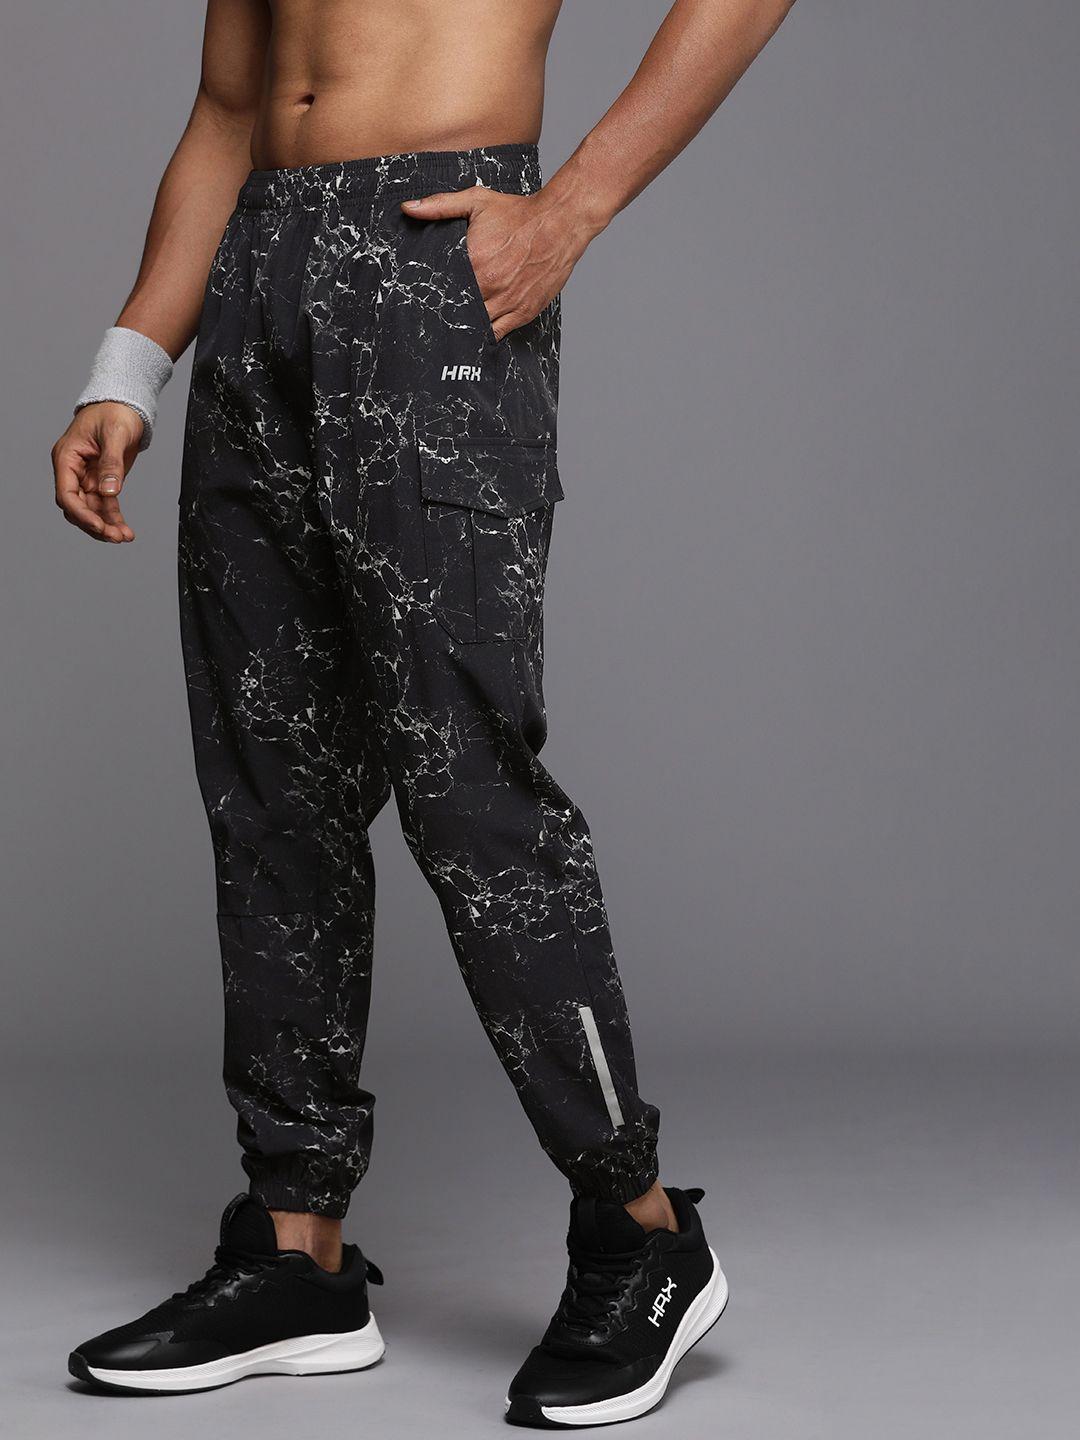 hrx by hrithik roshan men printed rapid-dry training joggers with reflective detail